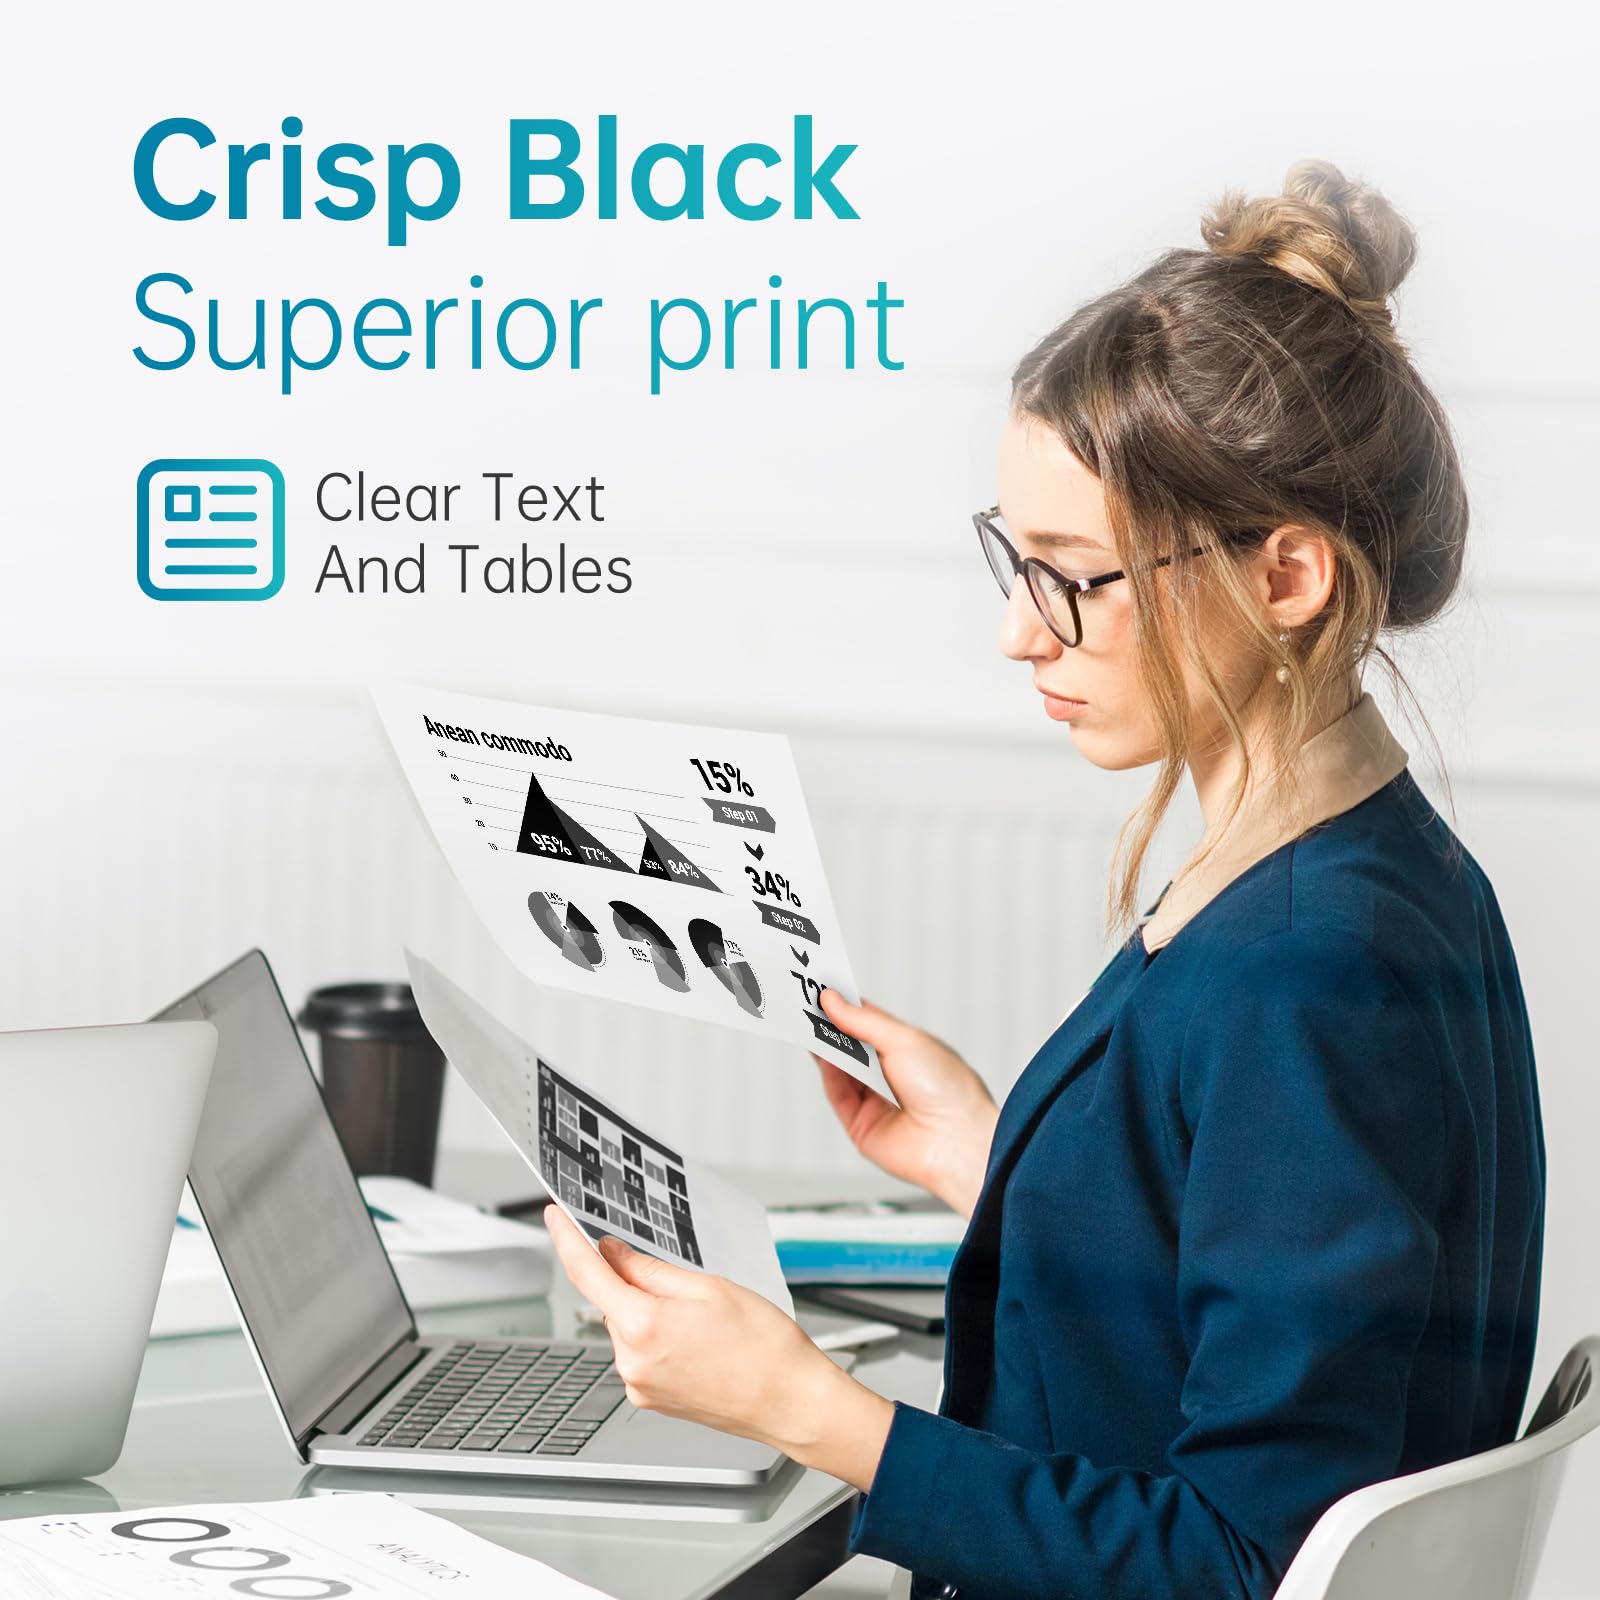 Crisp Black and Bright Color Output from LEMERO 220XL Ink Cartridges, Ensuring High-Quality Prints with Every Use.